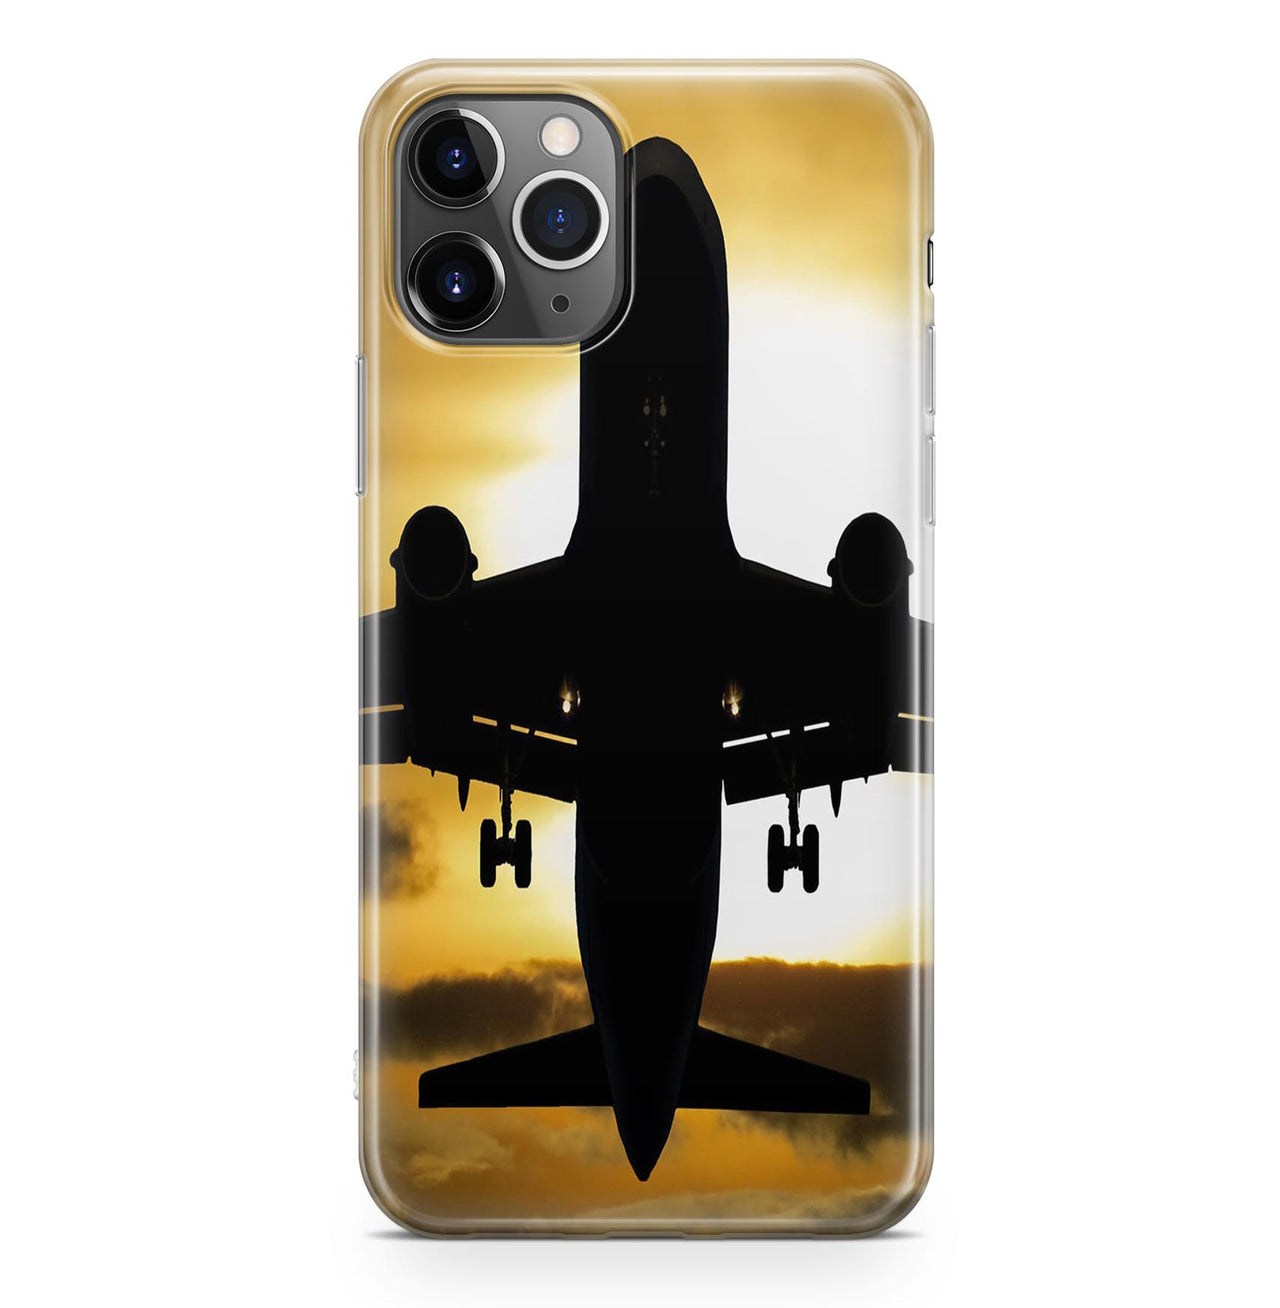 Departing Passanger Jet During Sunset Designed iPhone Cases